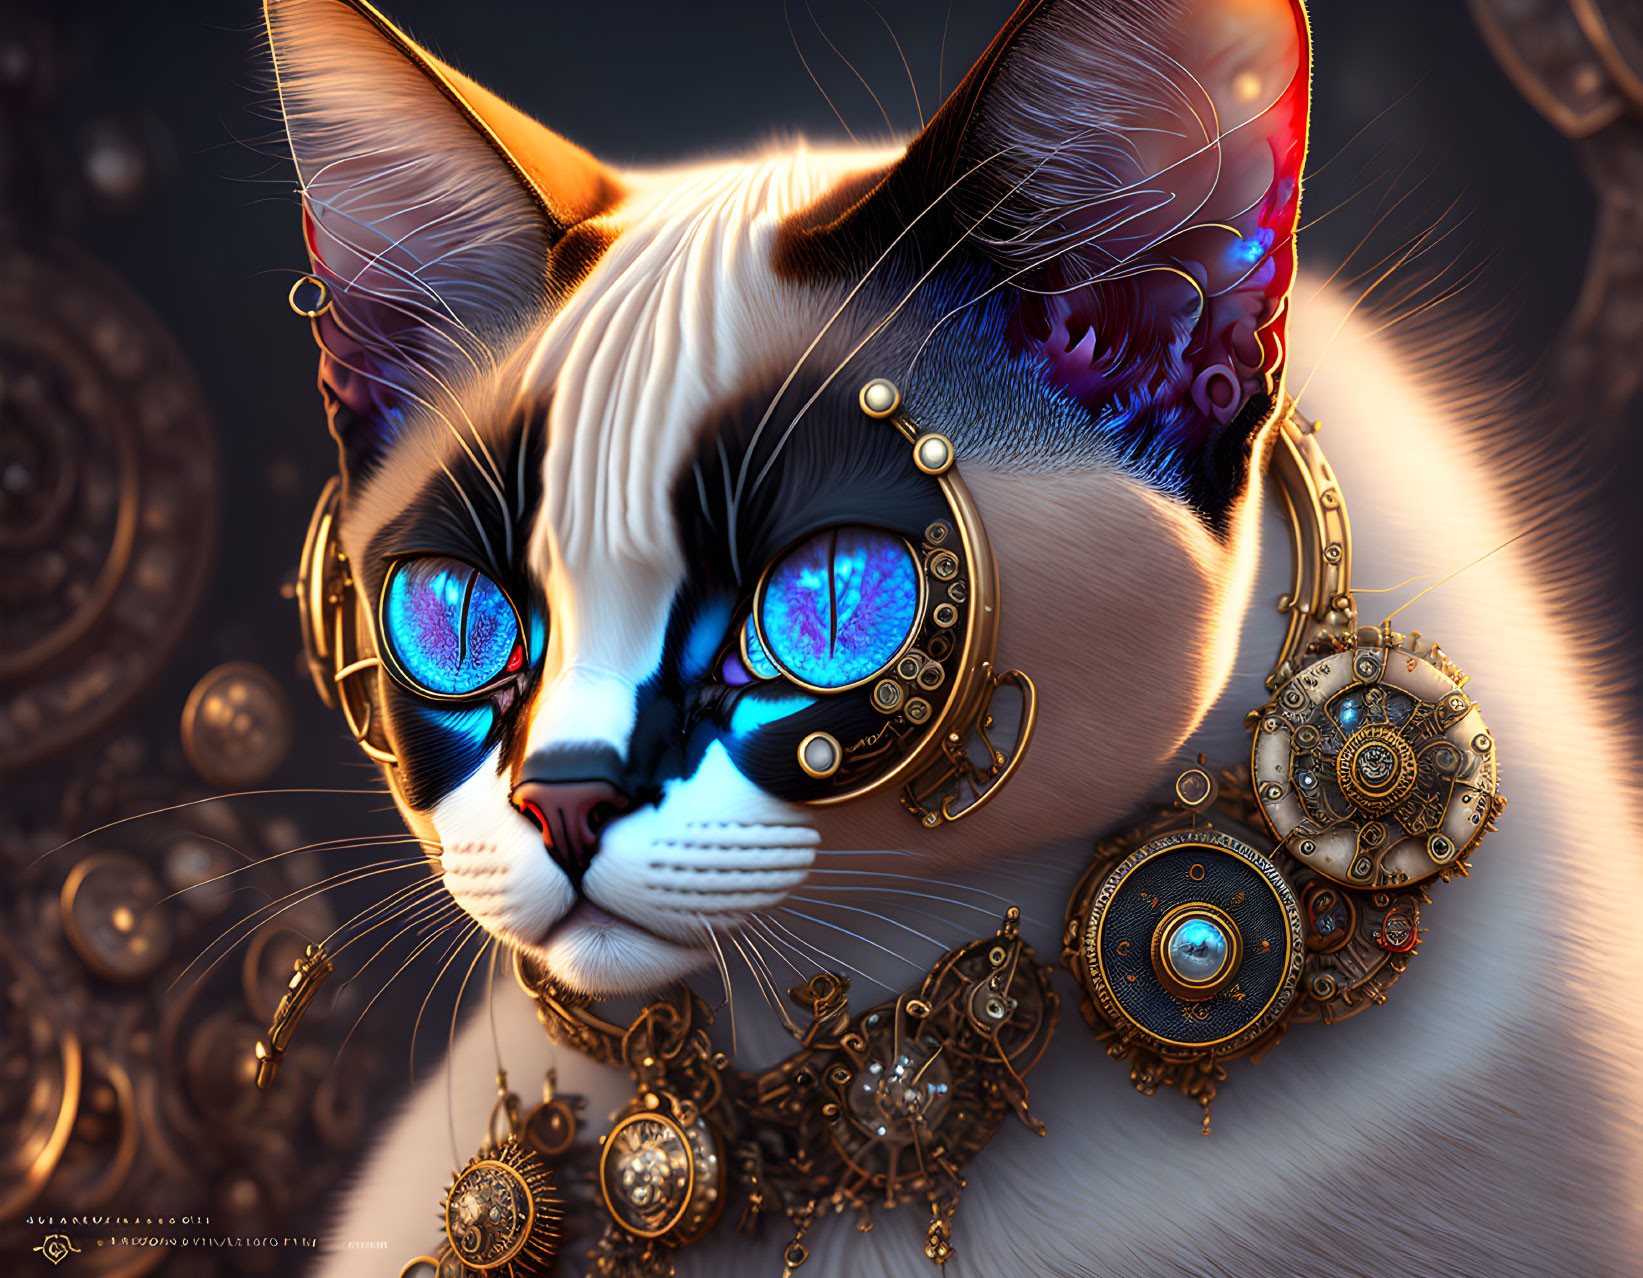 Steampunk-Inspired Cat Artwork with Brass Goggles and Blue Eyes